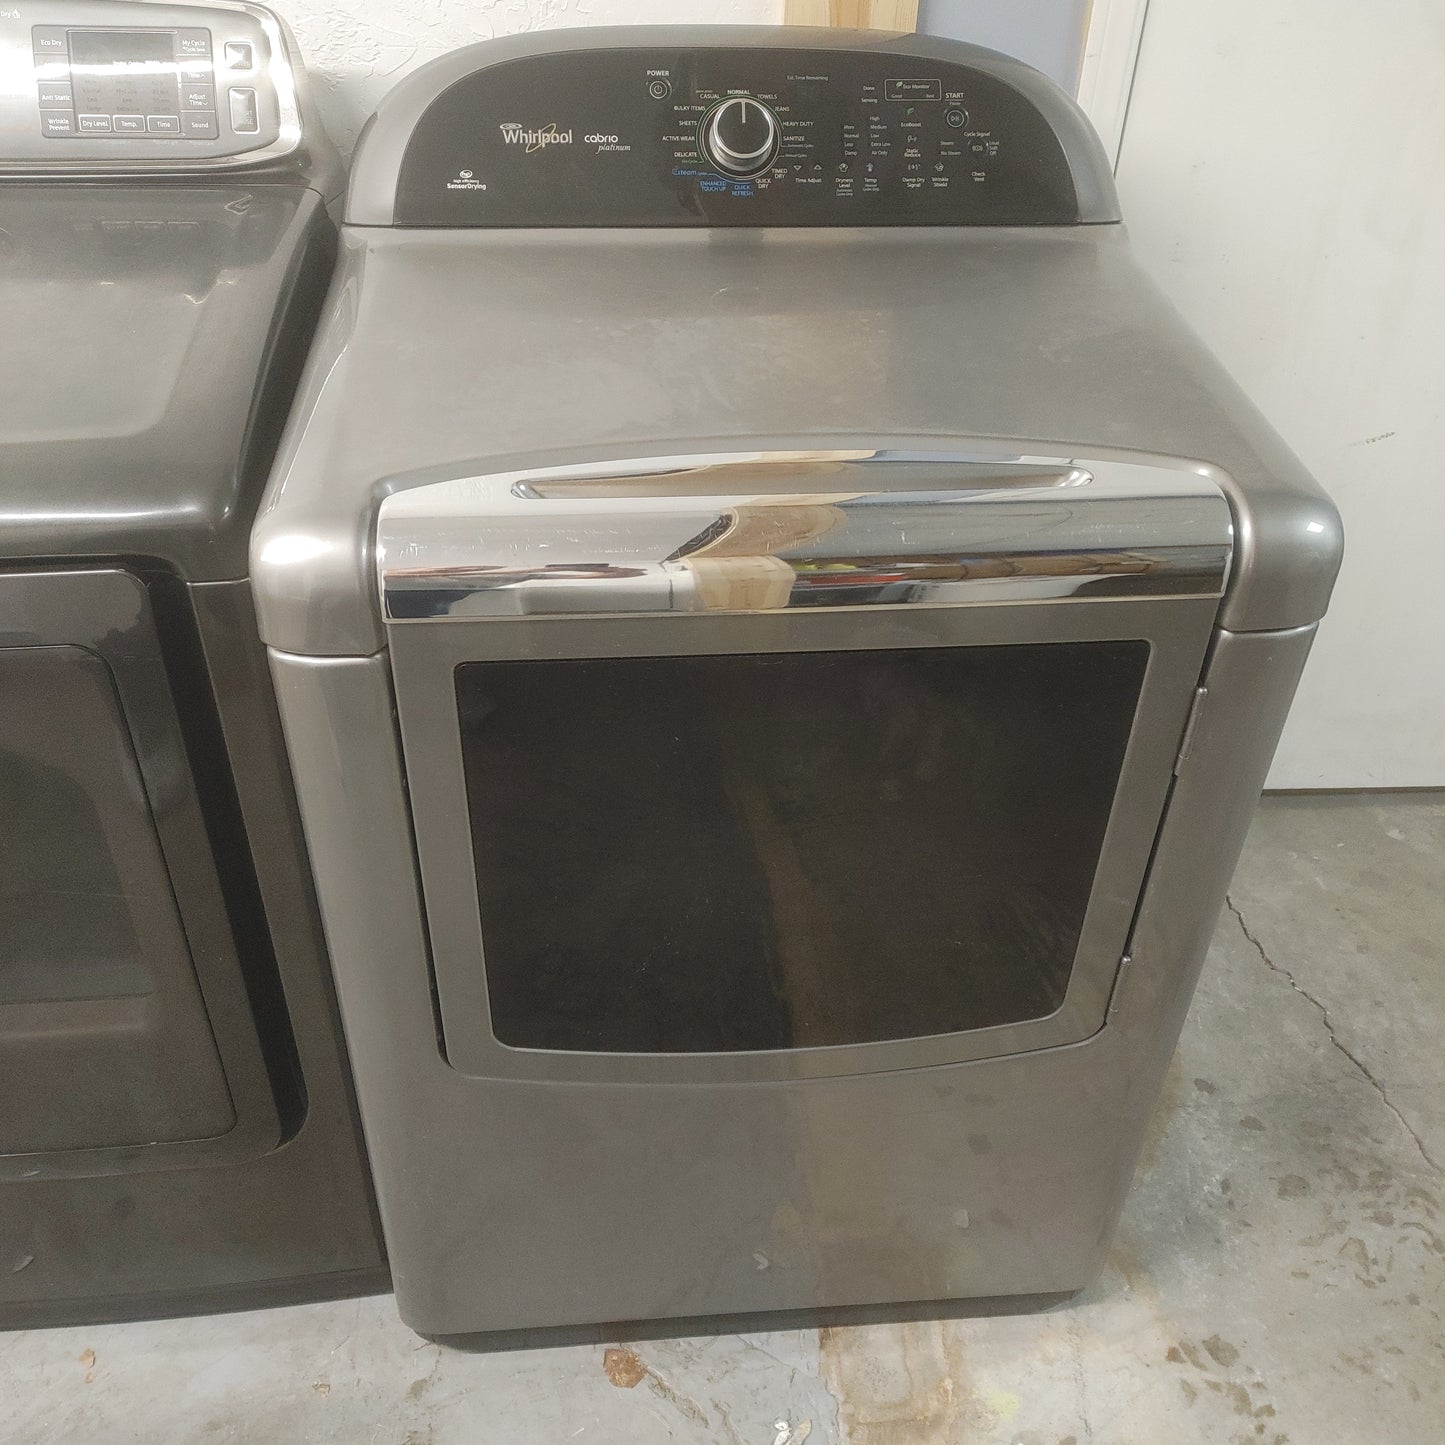 Used Whirlpool Cabrio 7.5 cubic ft Electric Dryer